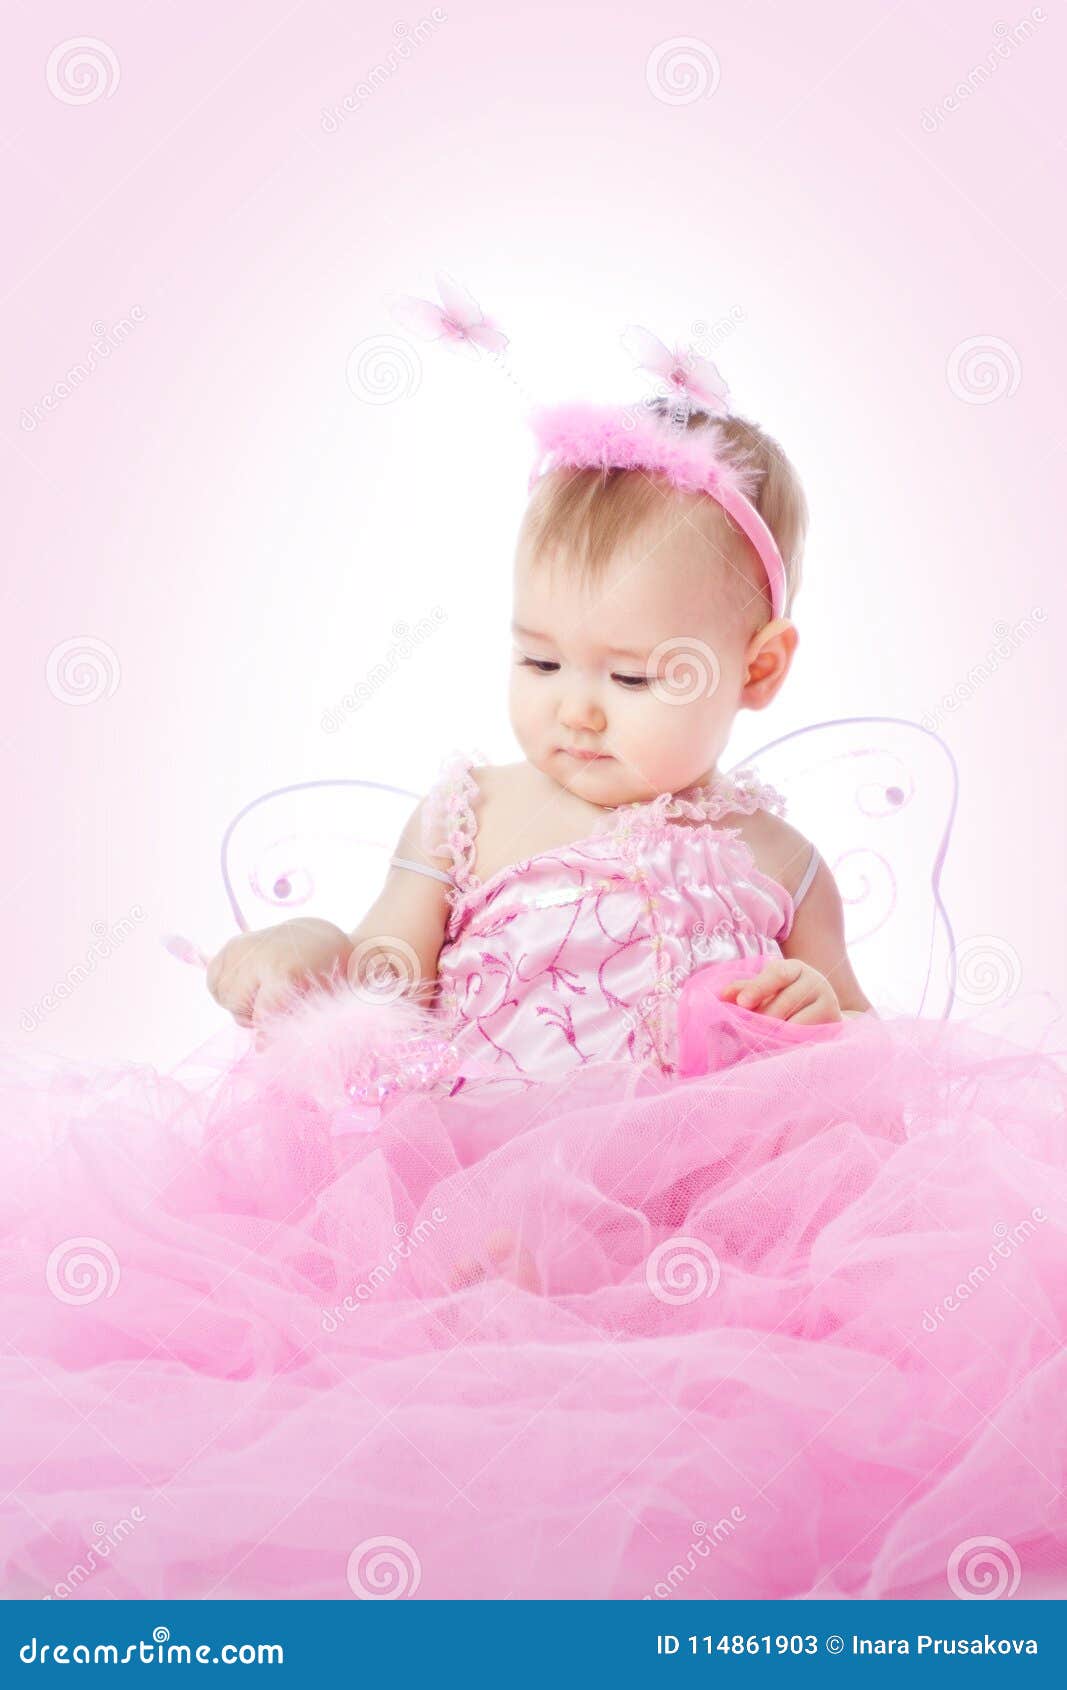 baby in pink dress